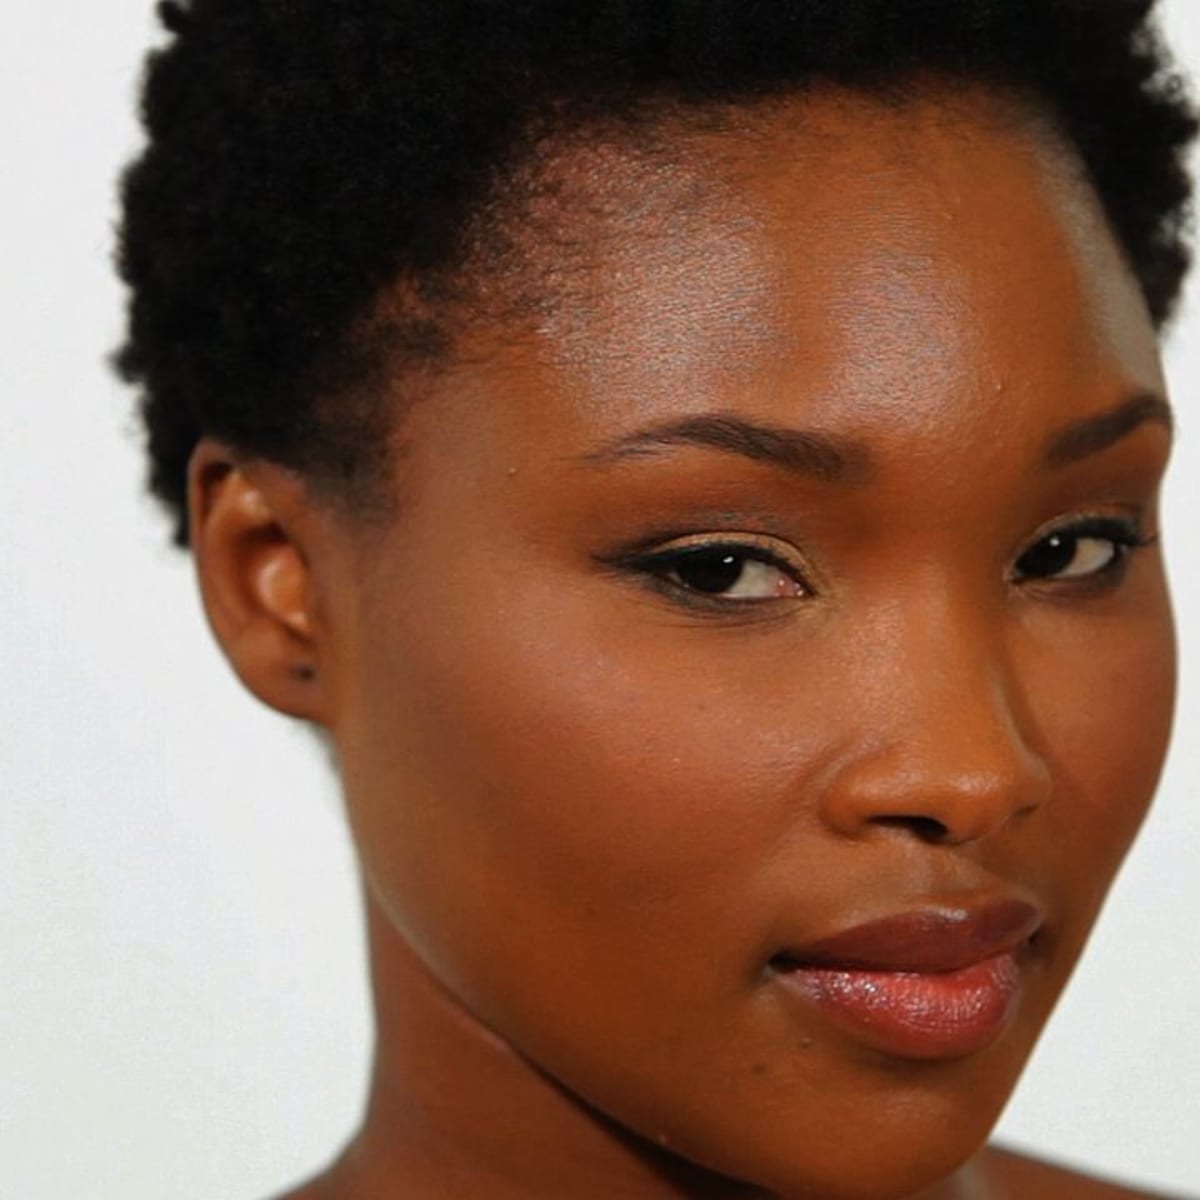 How To Apply Eye Makeup For Black Women